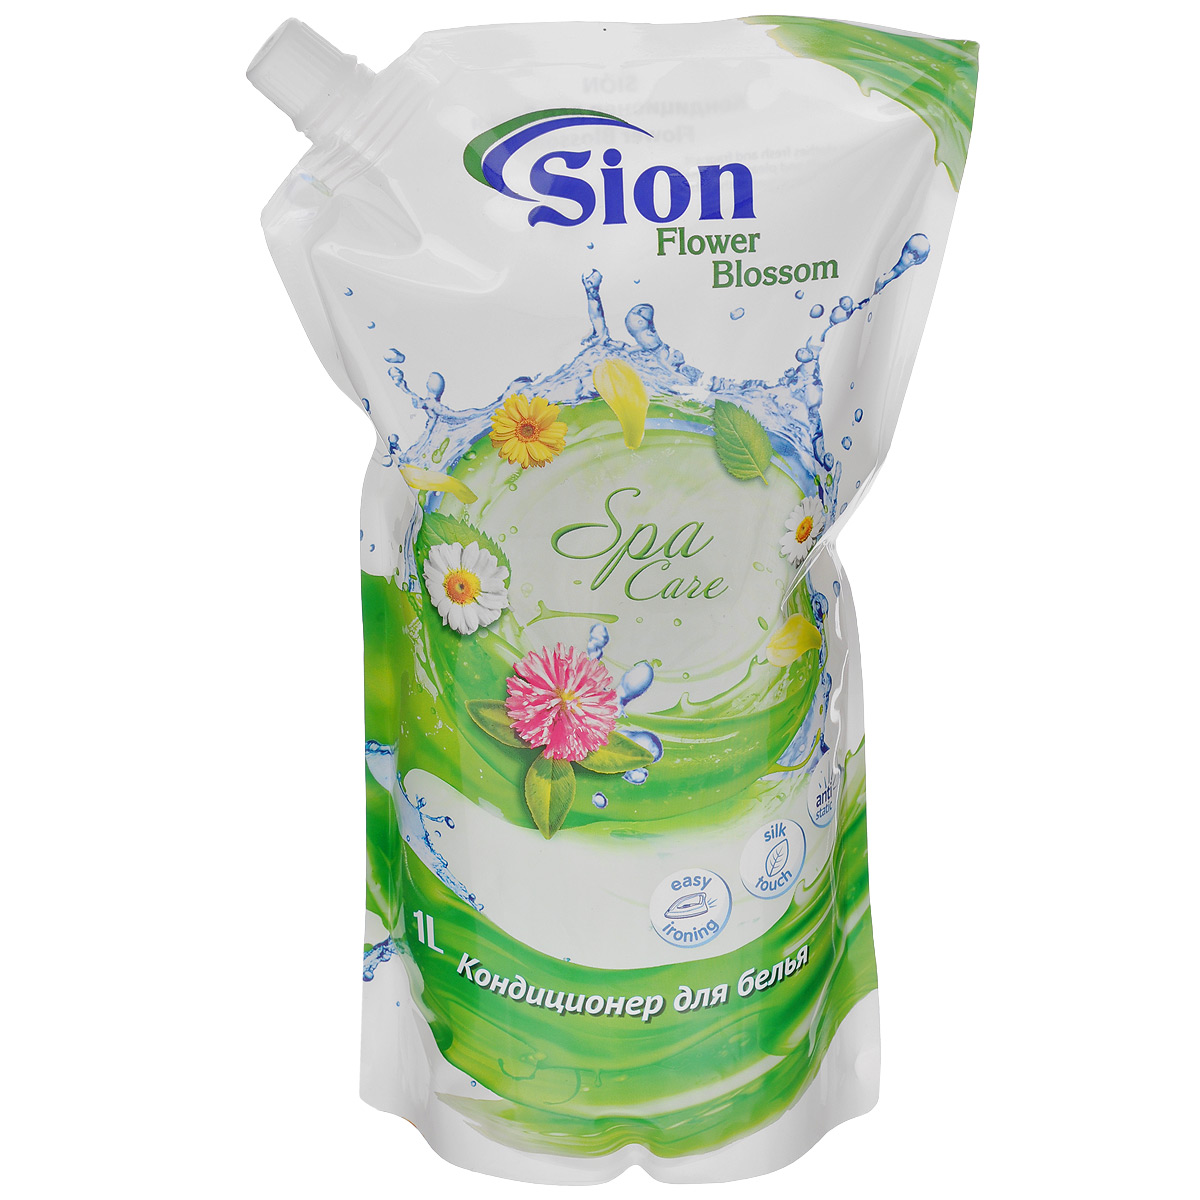    Sion "Flower Blossom", 1 